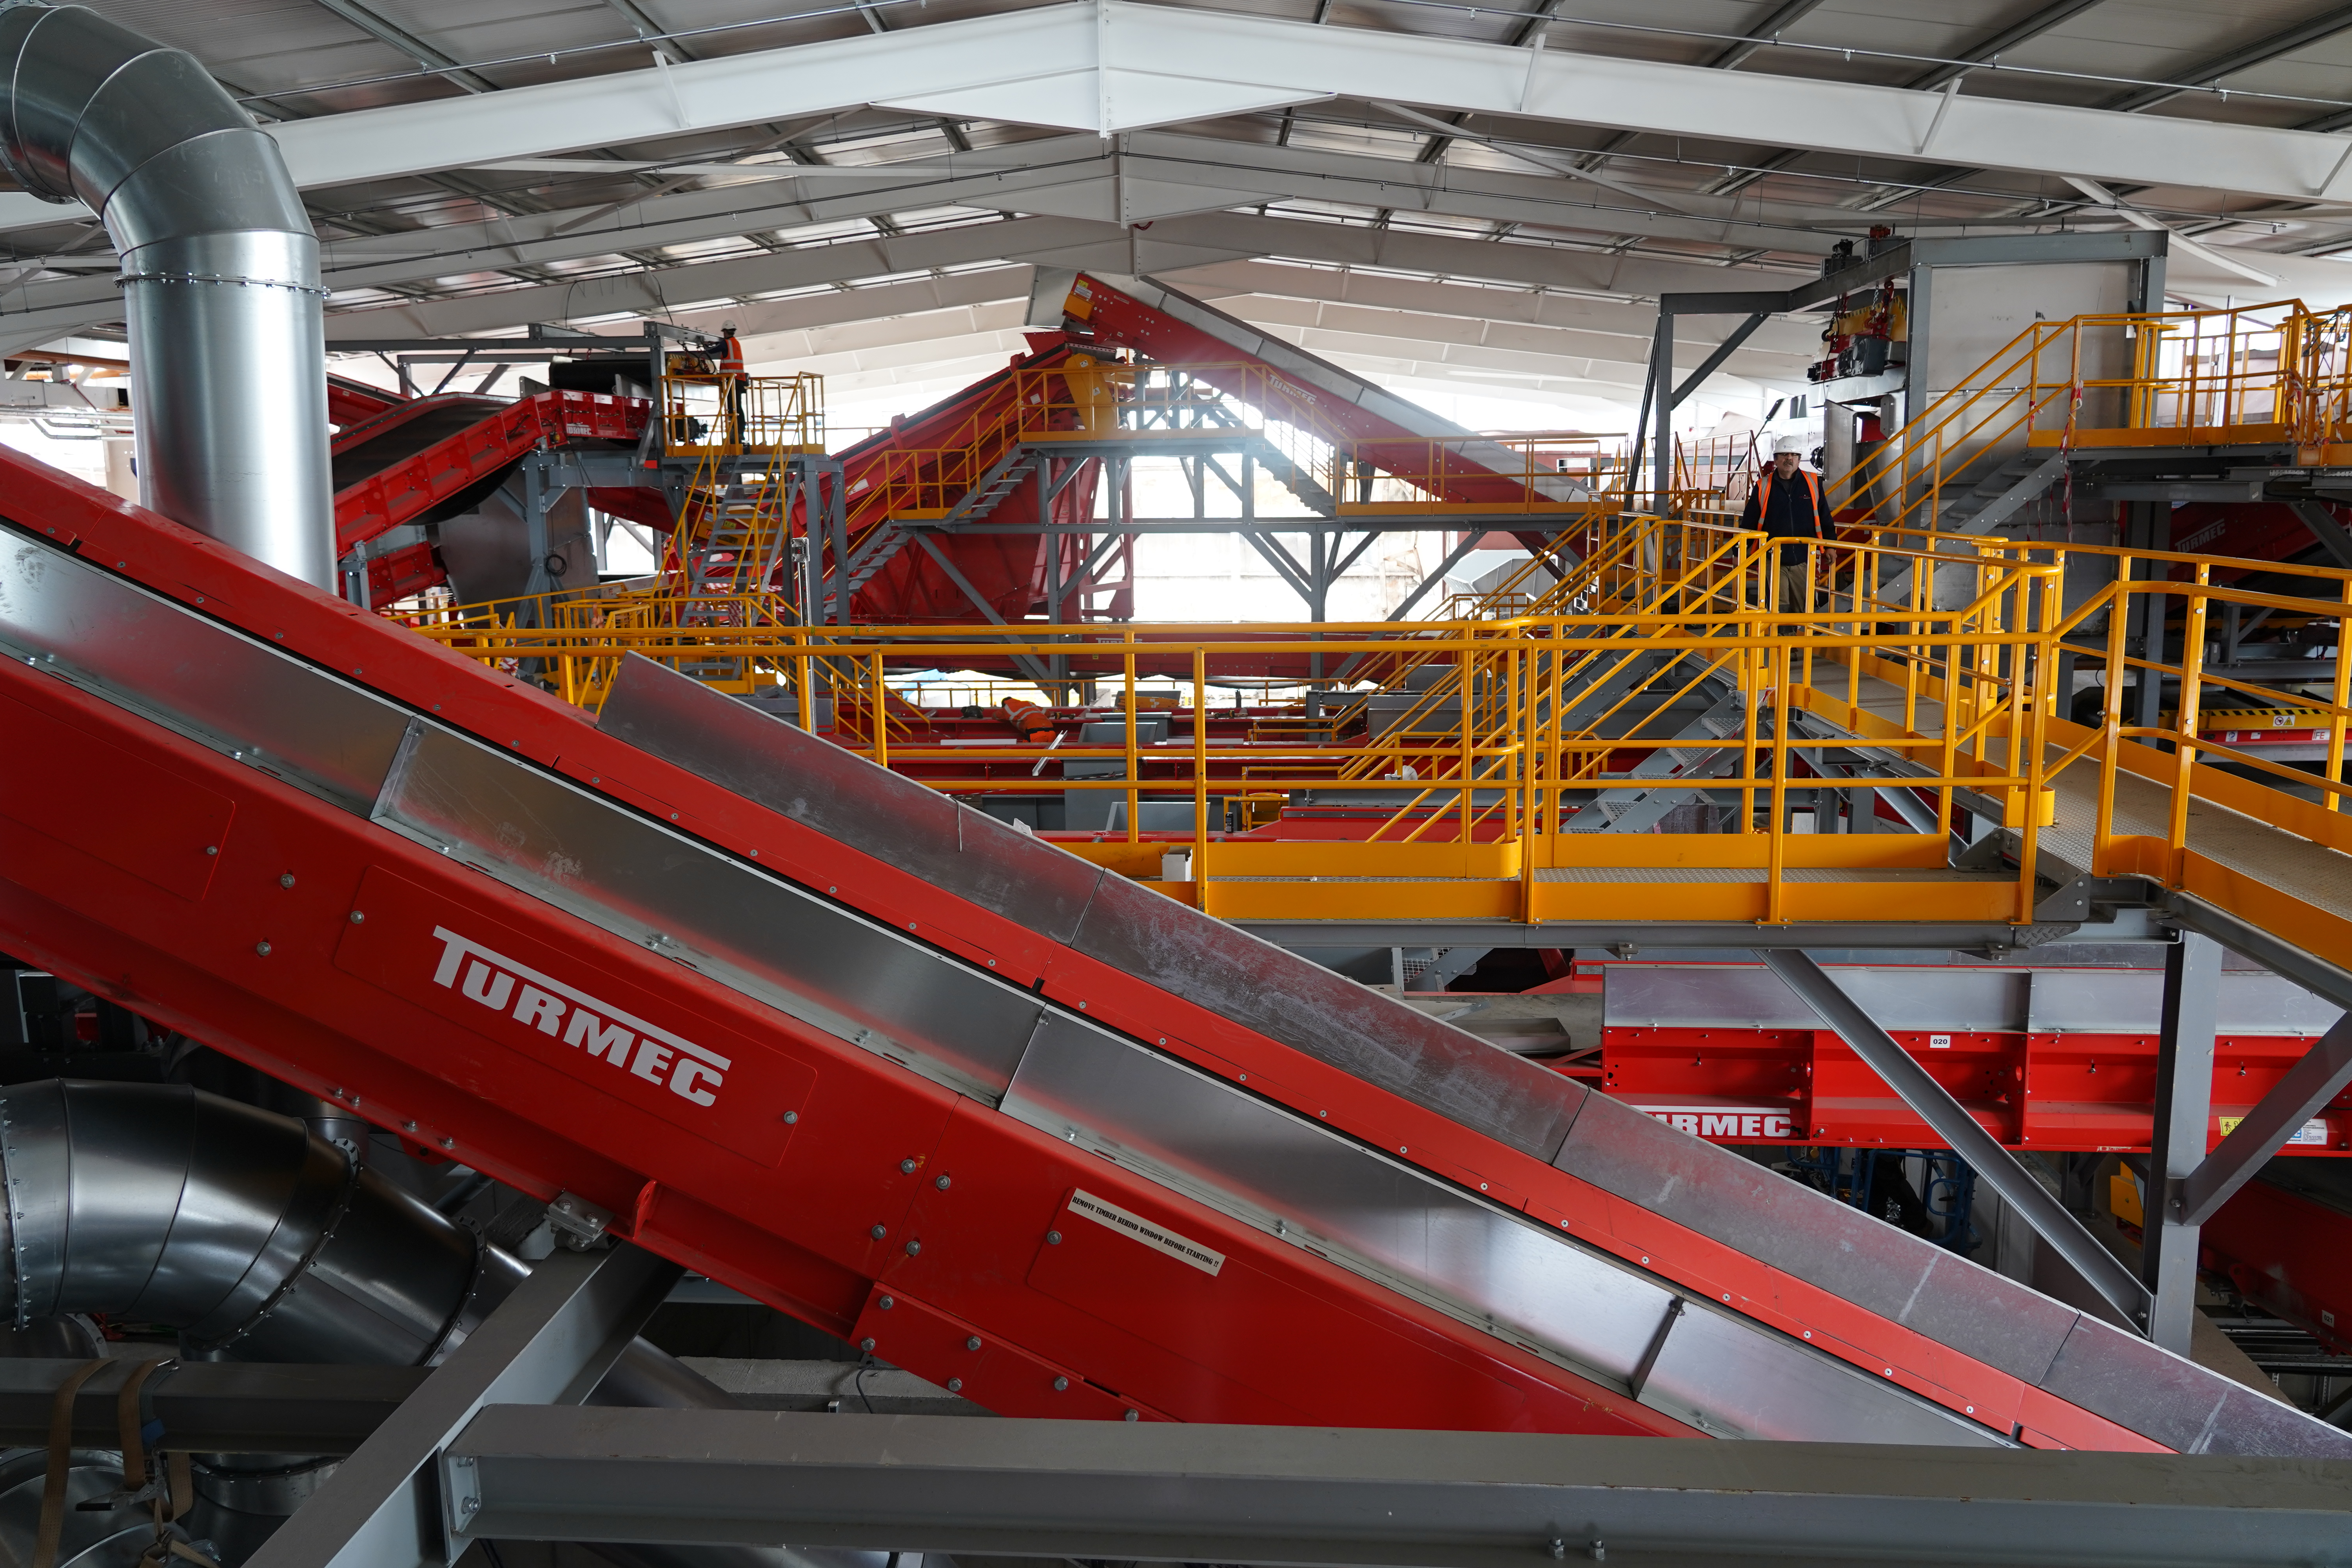 Turmec's State of Art Waste Recycling Facility for Thorntons Recycling